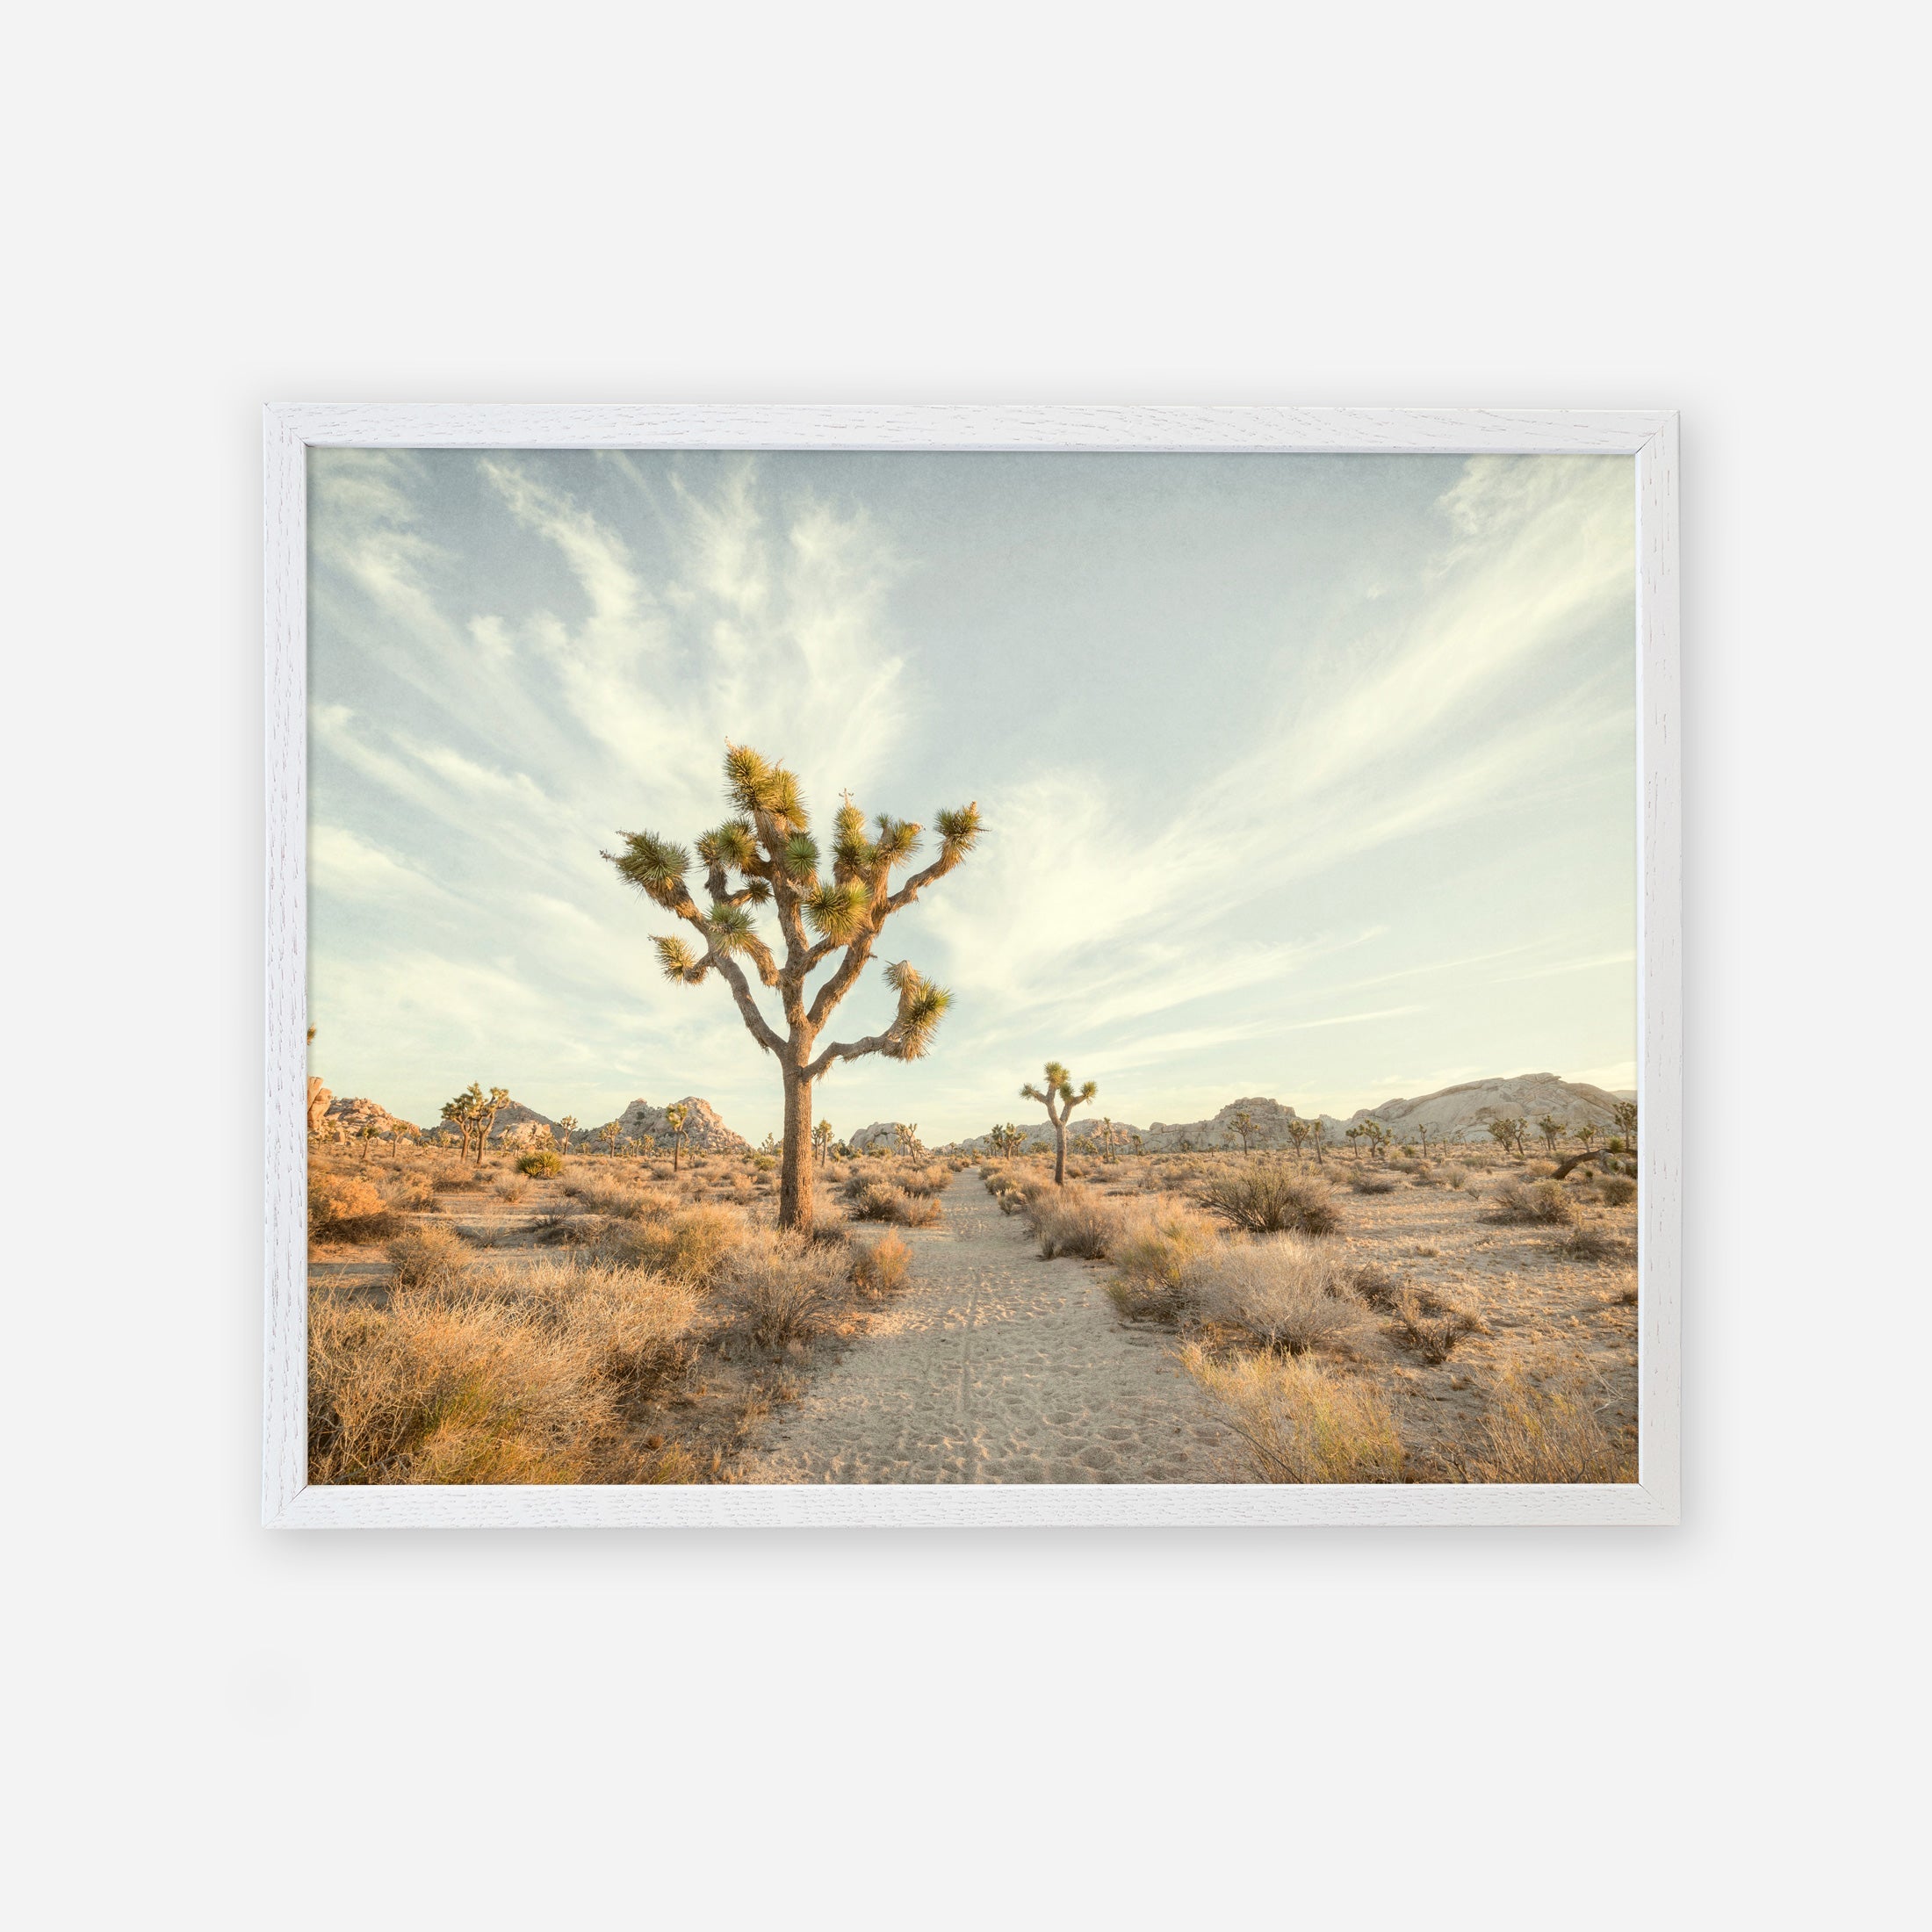 A serene desert landscape featuring a prominent Offley Green Joshua Tree Print, &#39;Path to Joshua&#39; in the center, set against a pale sky with wispy clouds, and surrounded by sparse vegetation and rocky terrain near Palm Springs.